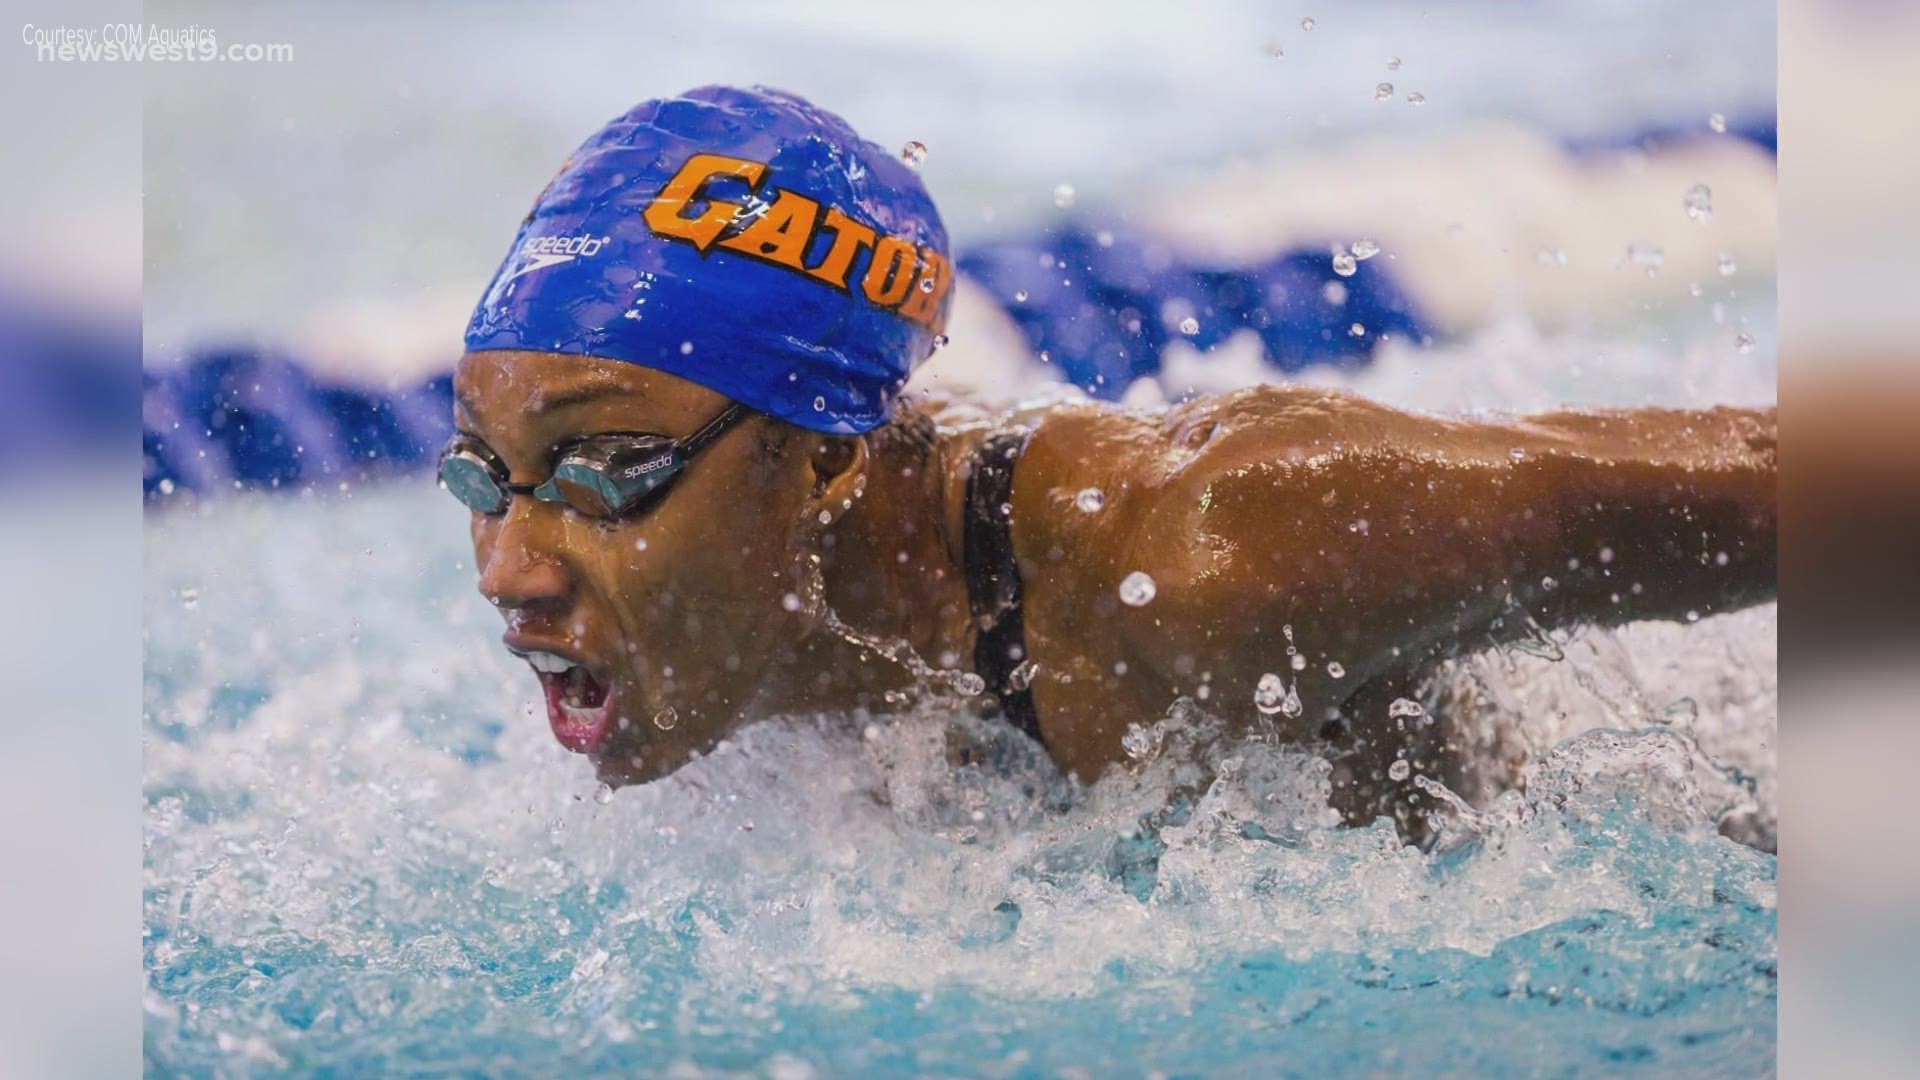 Natalie Hinds will race in the 100-meter freestyle at 8:00 p.m. CT on NBCSN.